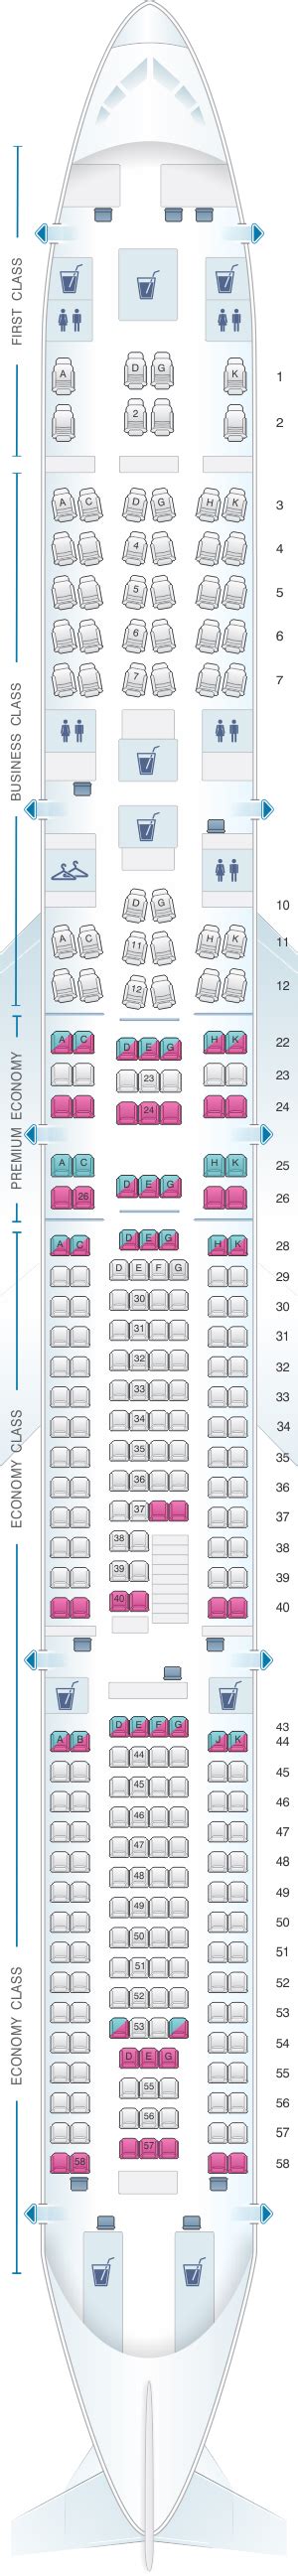 Seat Map Airbus A Seatmaestro My Xxx Hot Girl